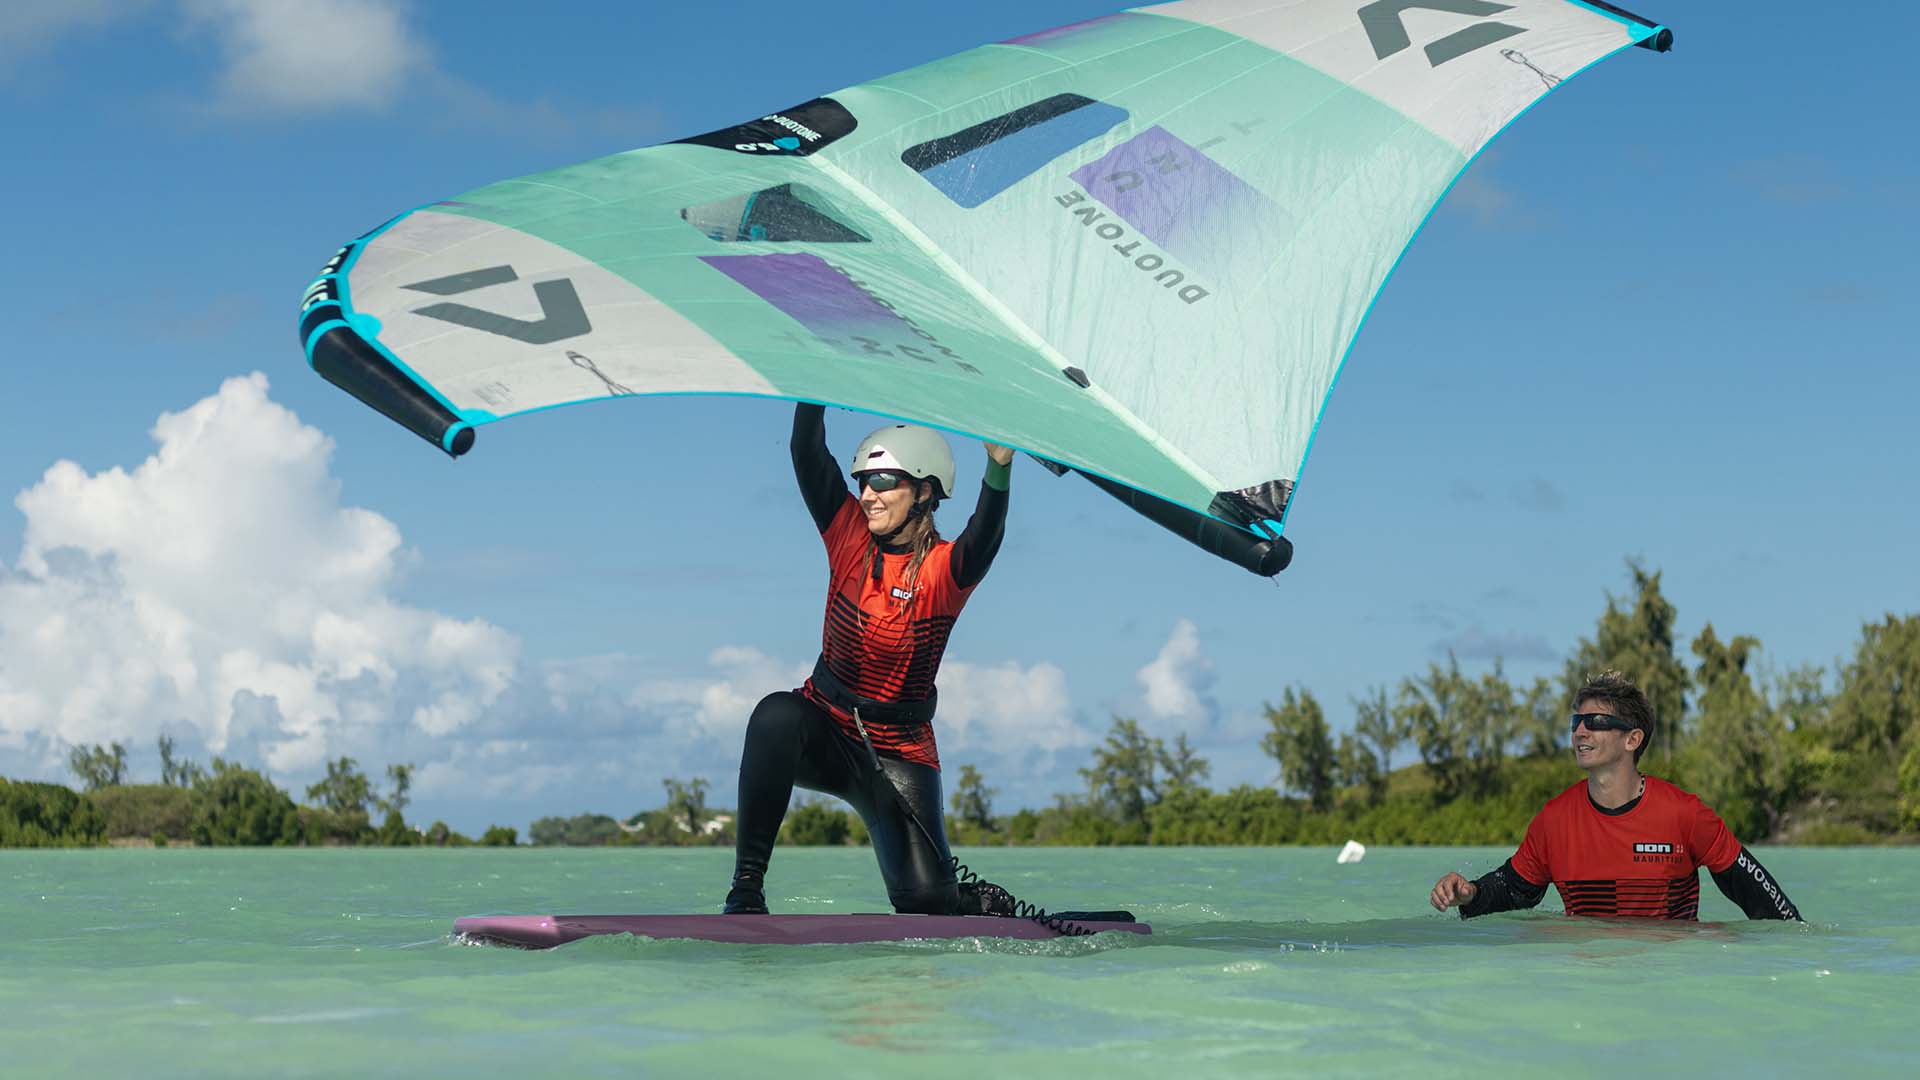 wingfoil lessons in turquoise water